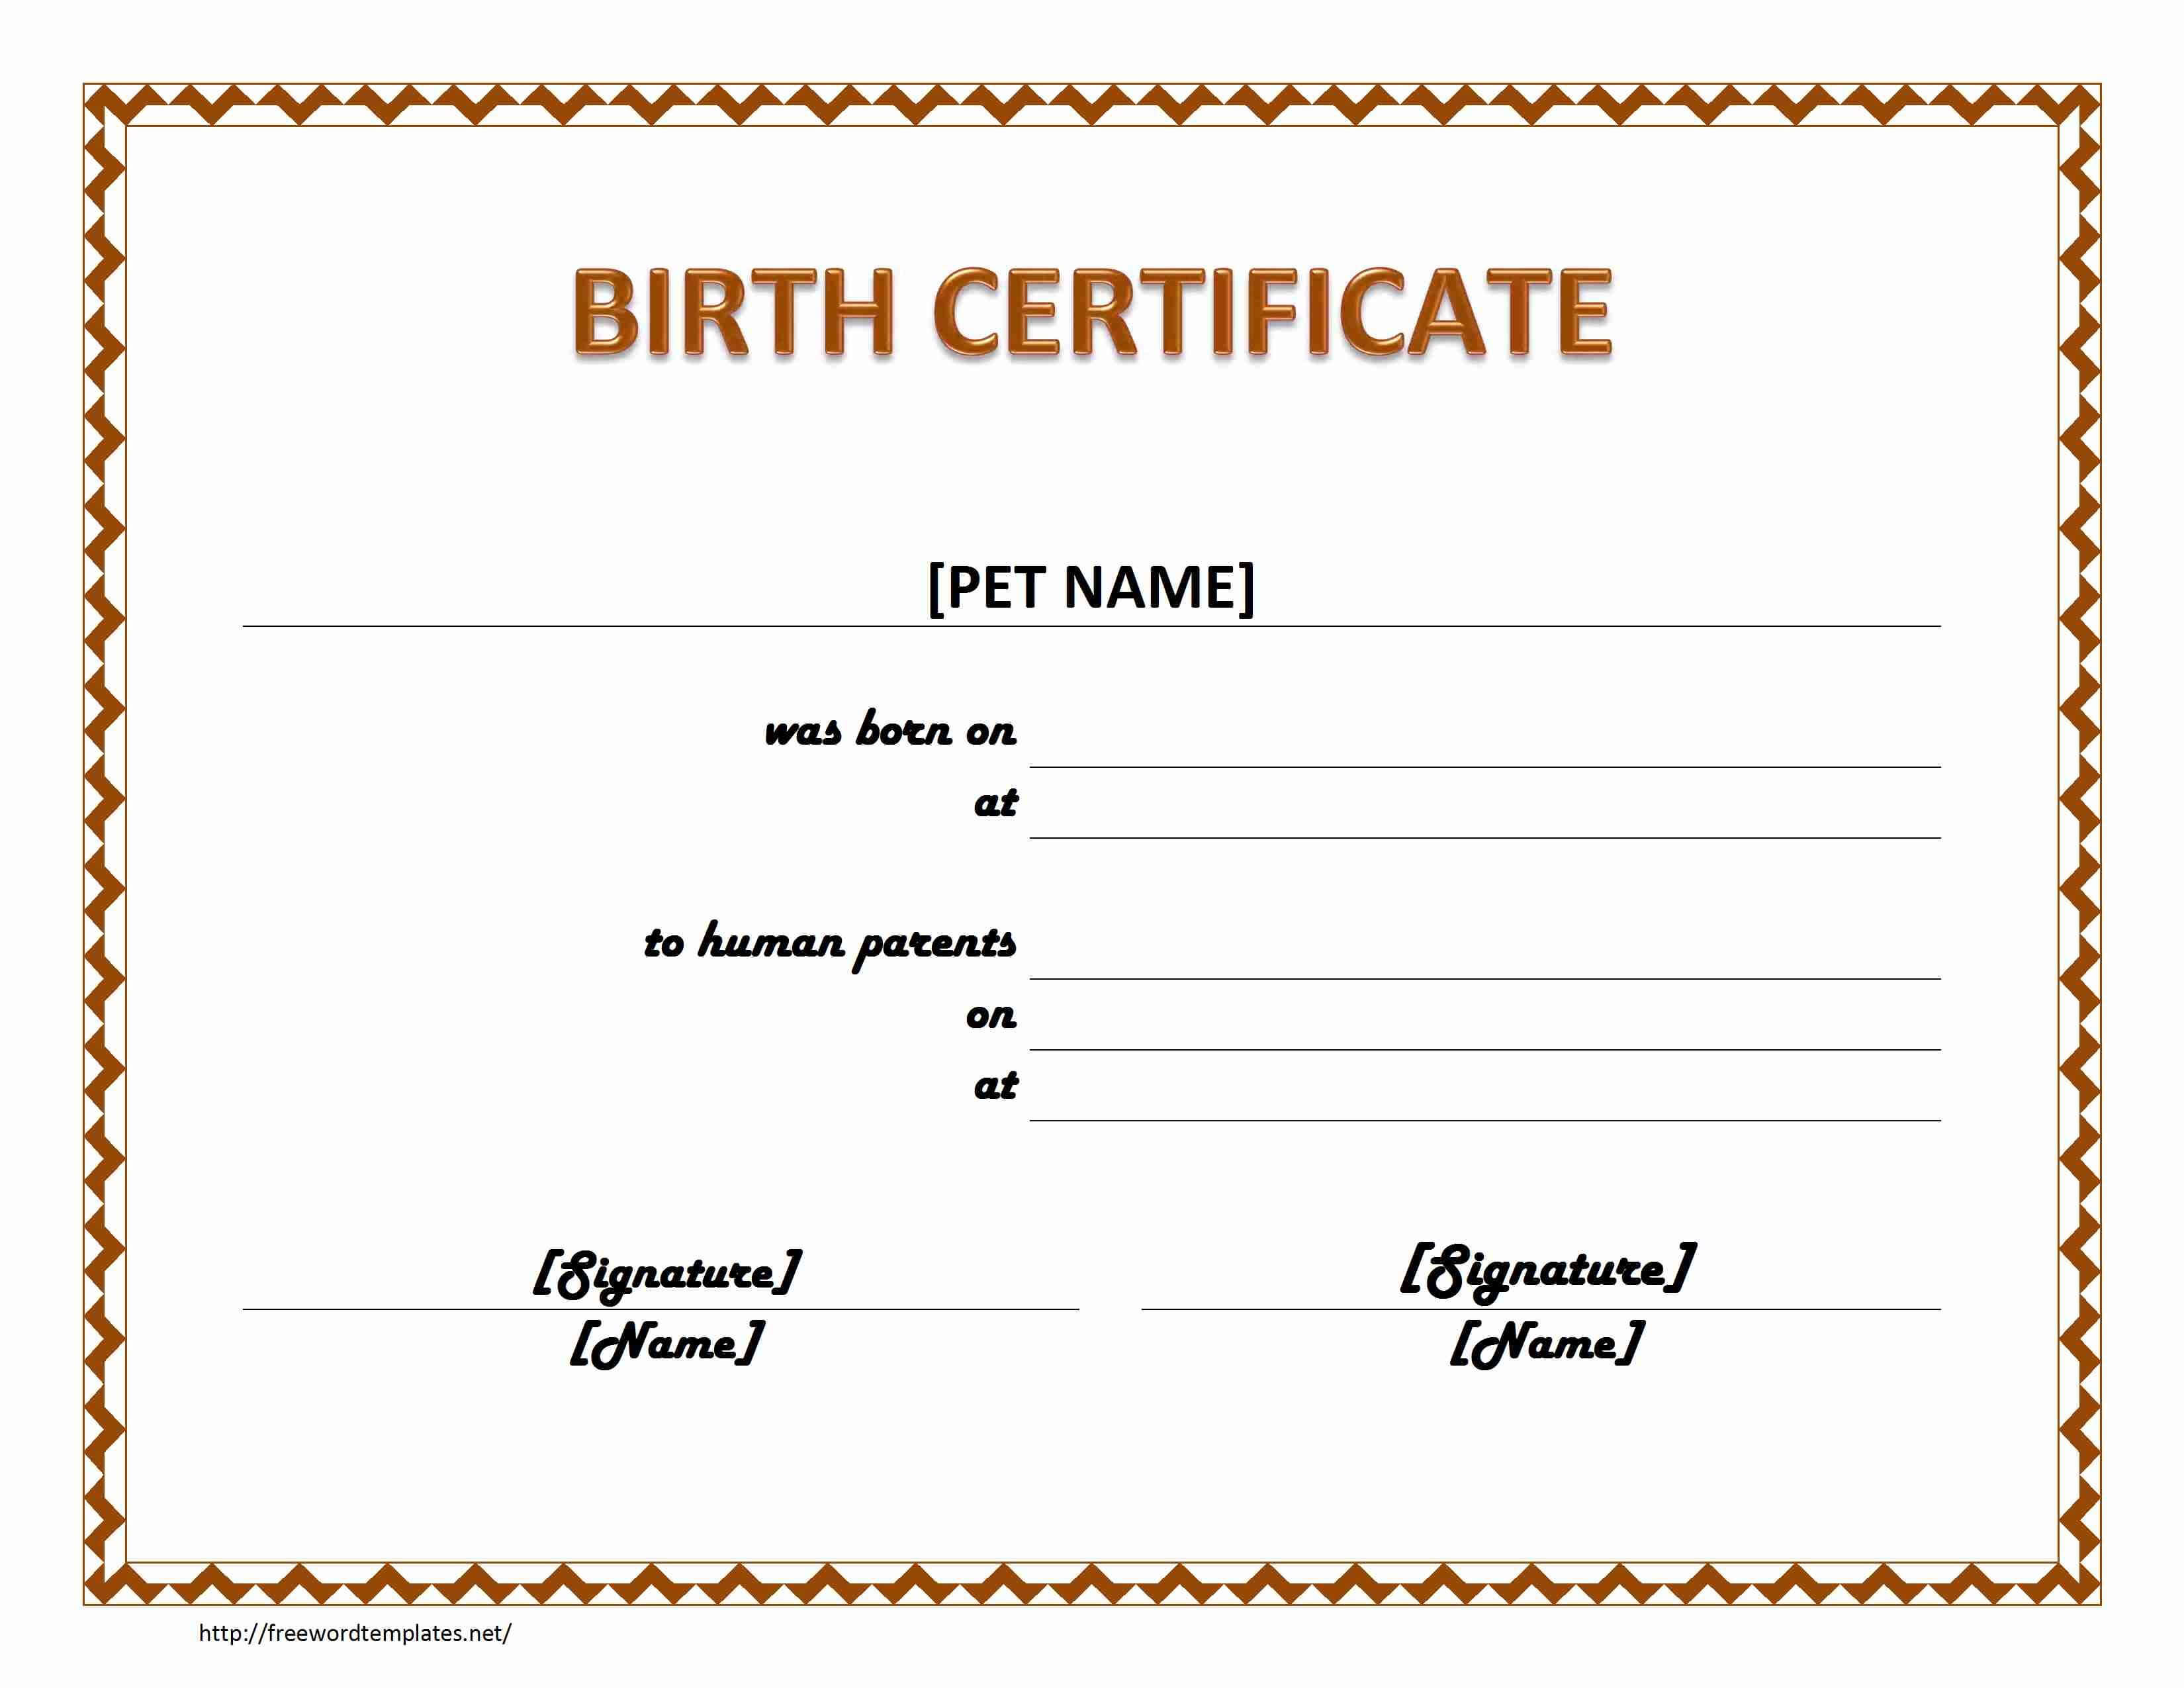 Pet Birth Certificate Maker | Pet Birth Certificate For Word For Blank Adoption Certificate Template